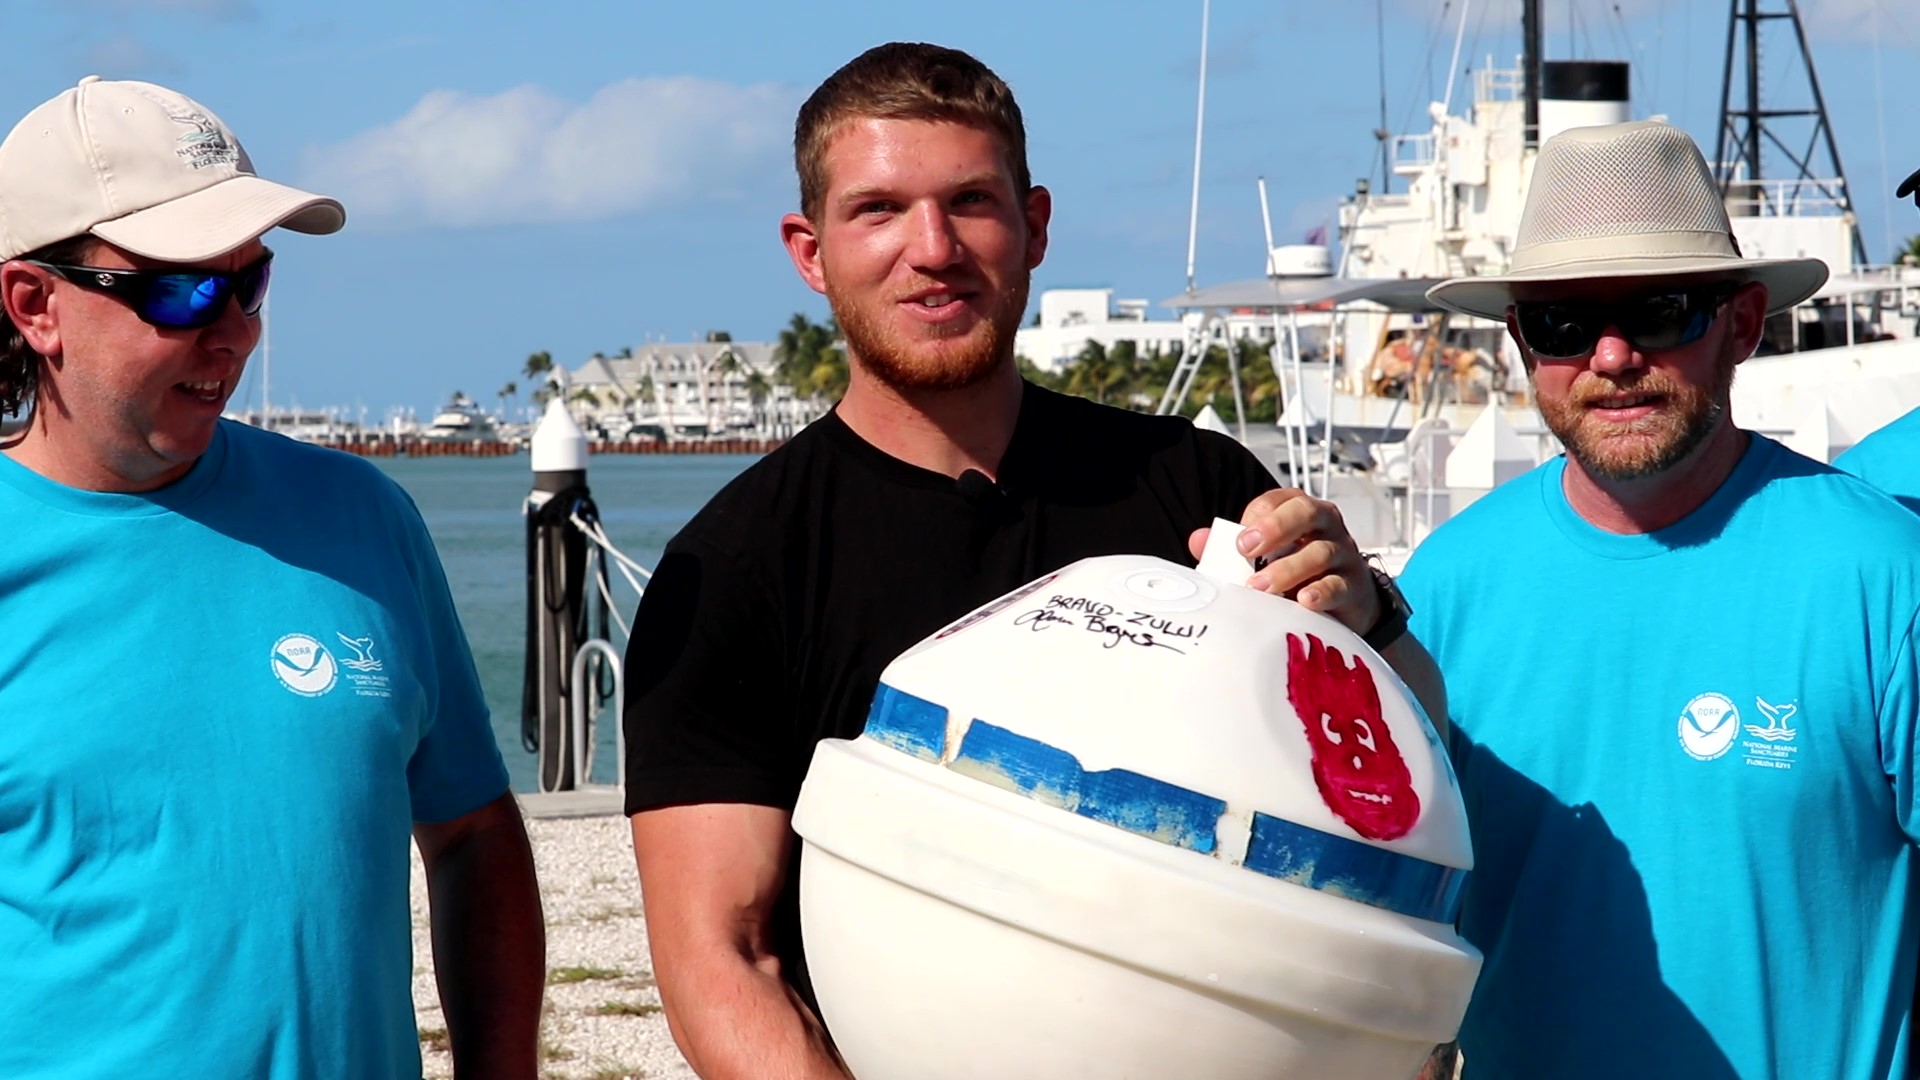 People pose with a buoy